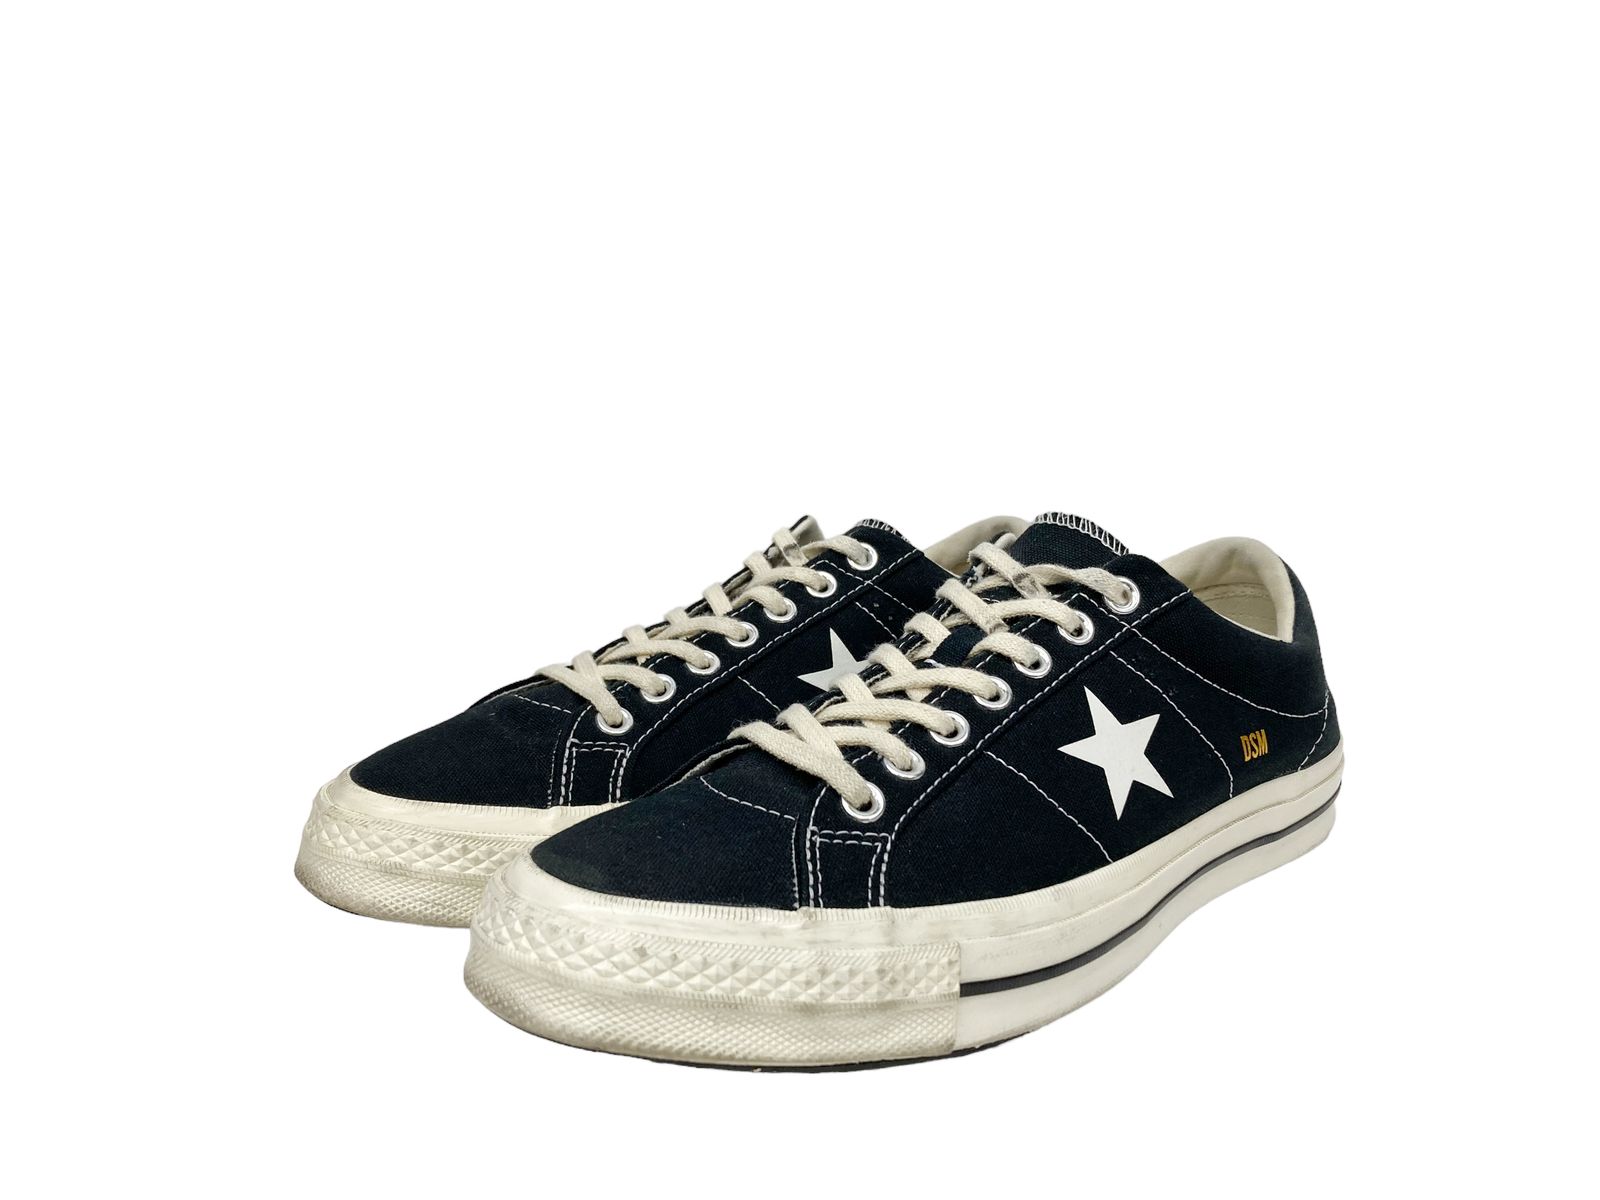 CONVERSE×DOVER STREET MARKET ONE STAR OX